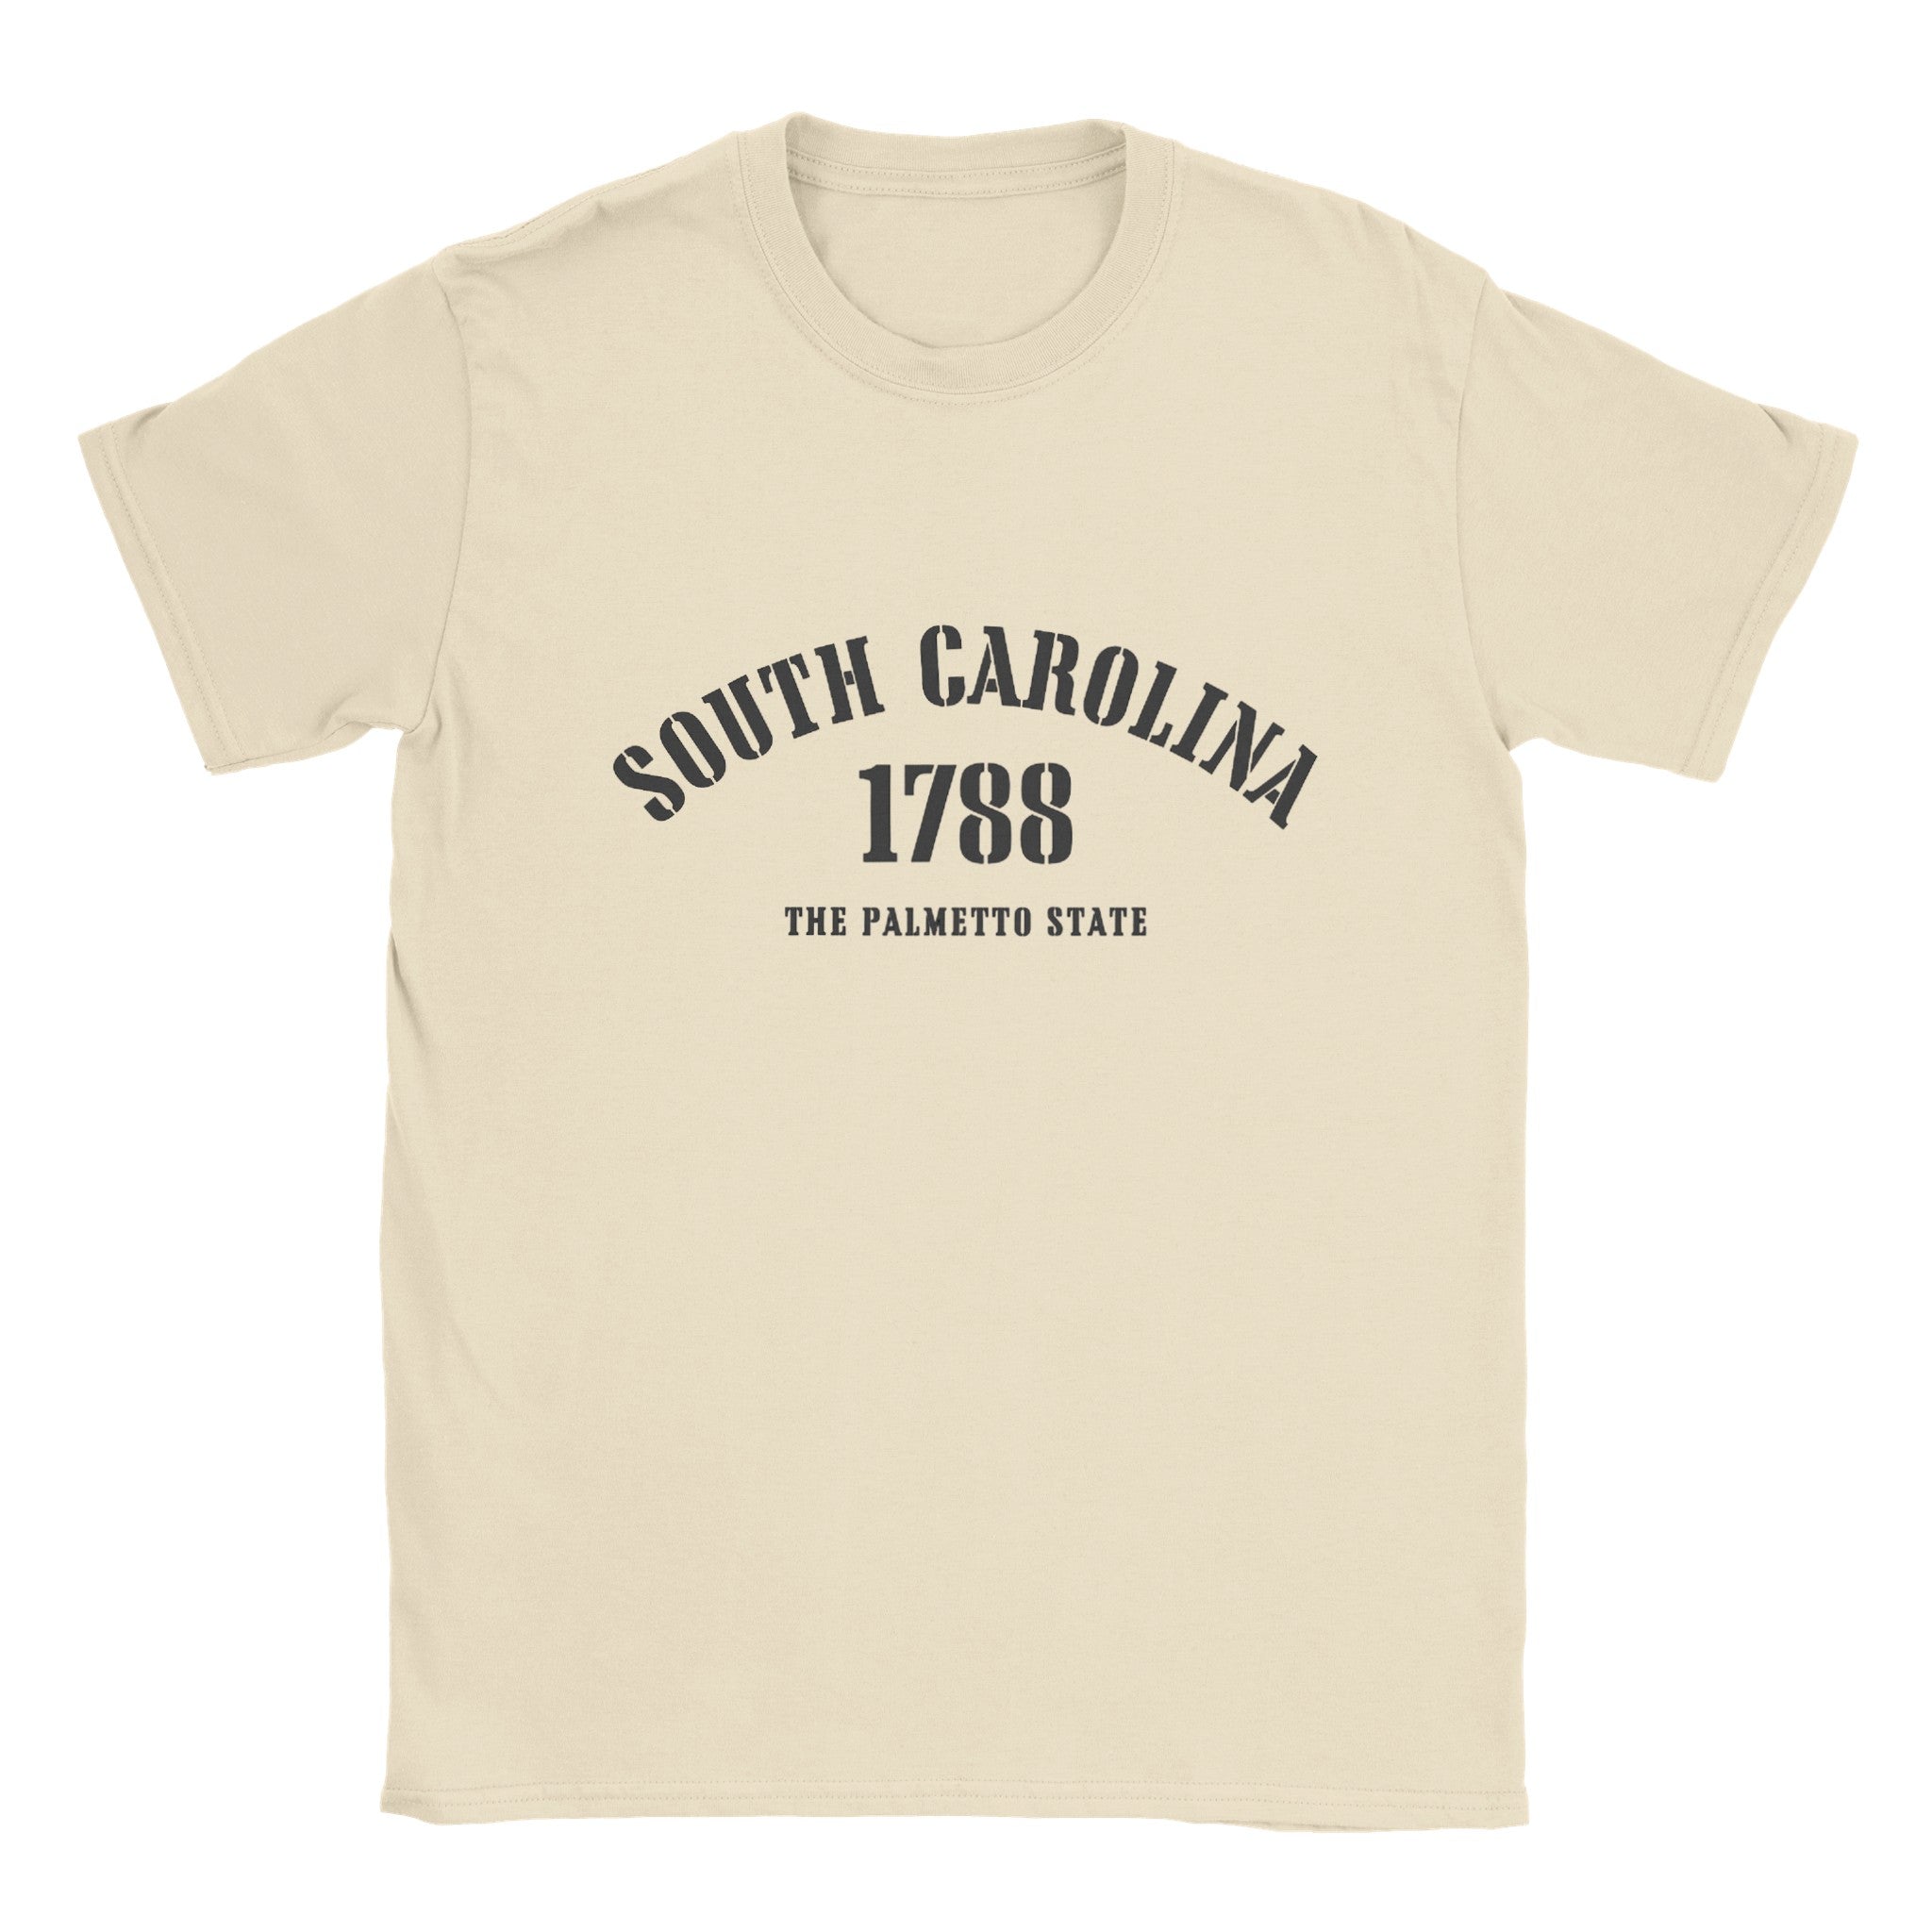 South Carolina- Classic Unisex Crewneck States T-shirt - Creations by Chris and Carlos